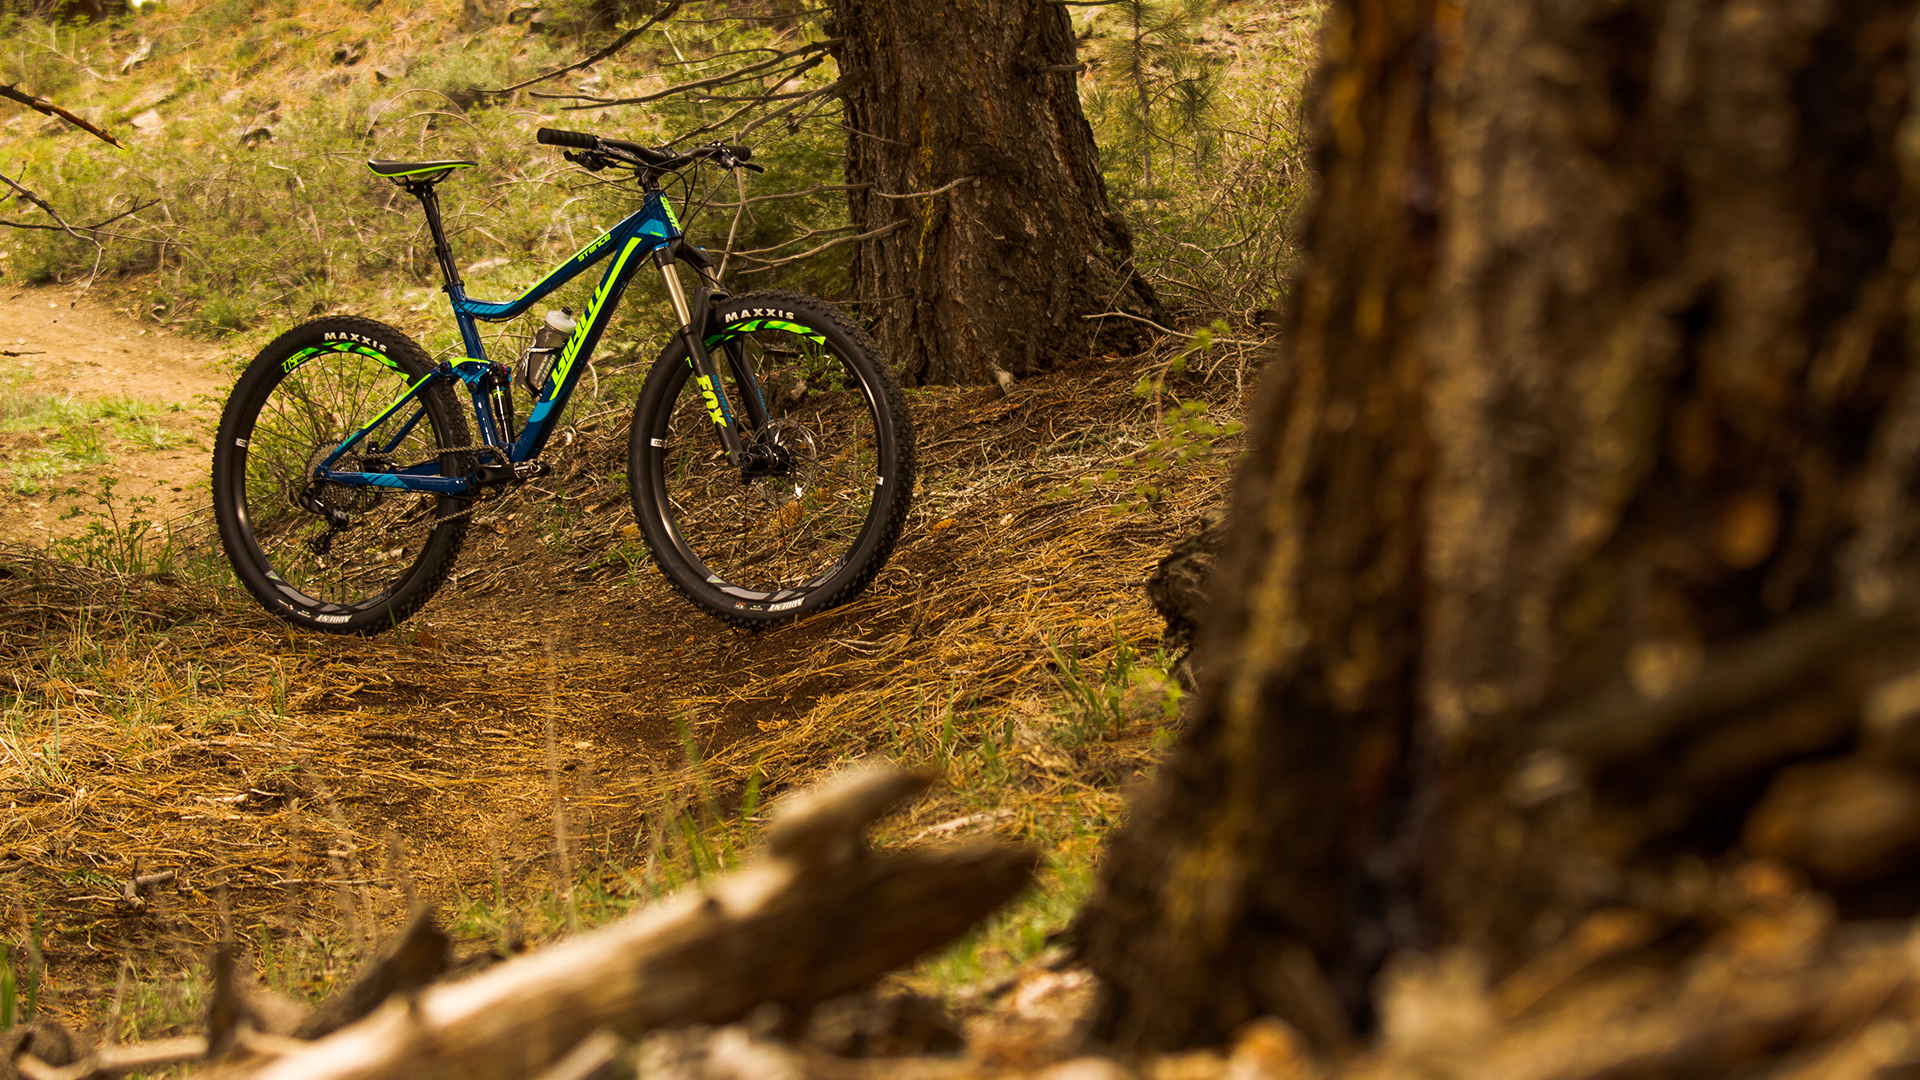 2016 Giant Bicycles, stance adv